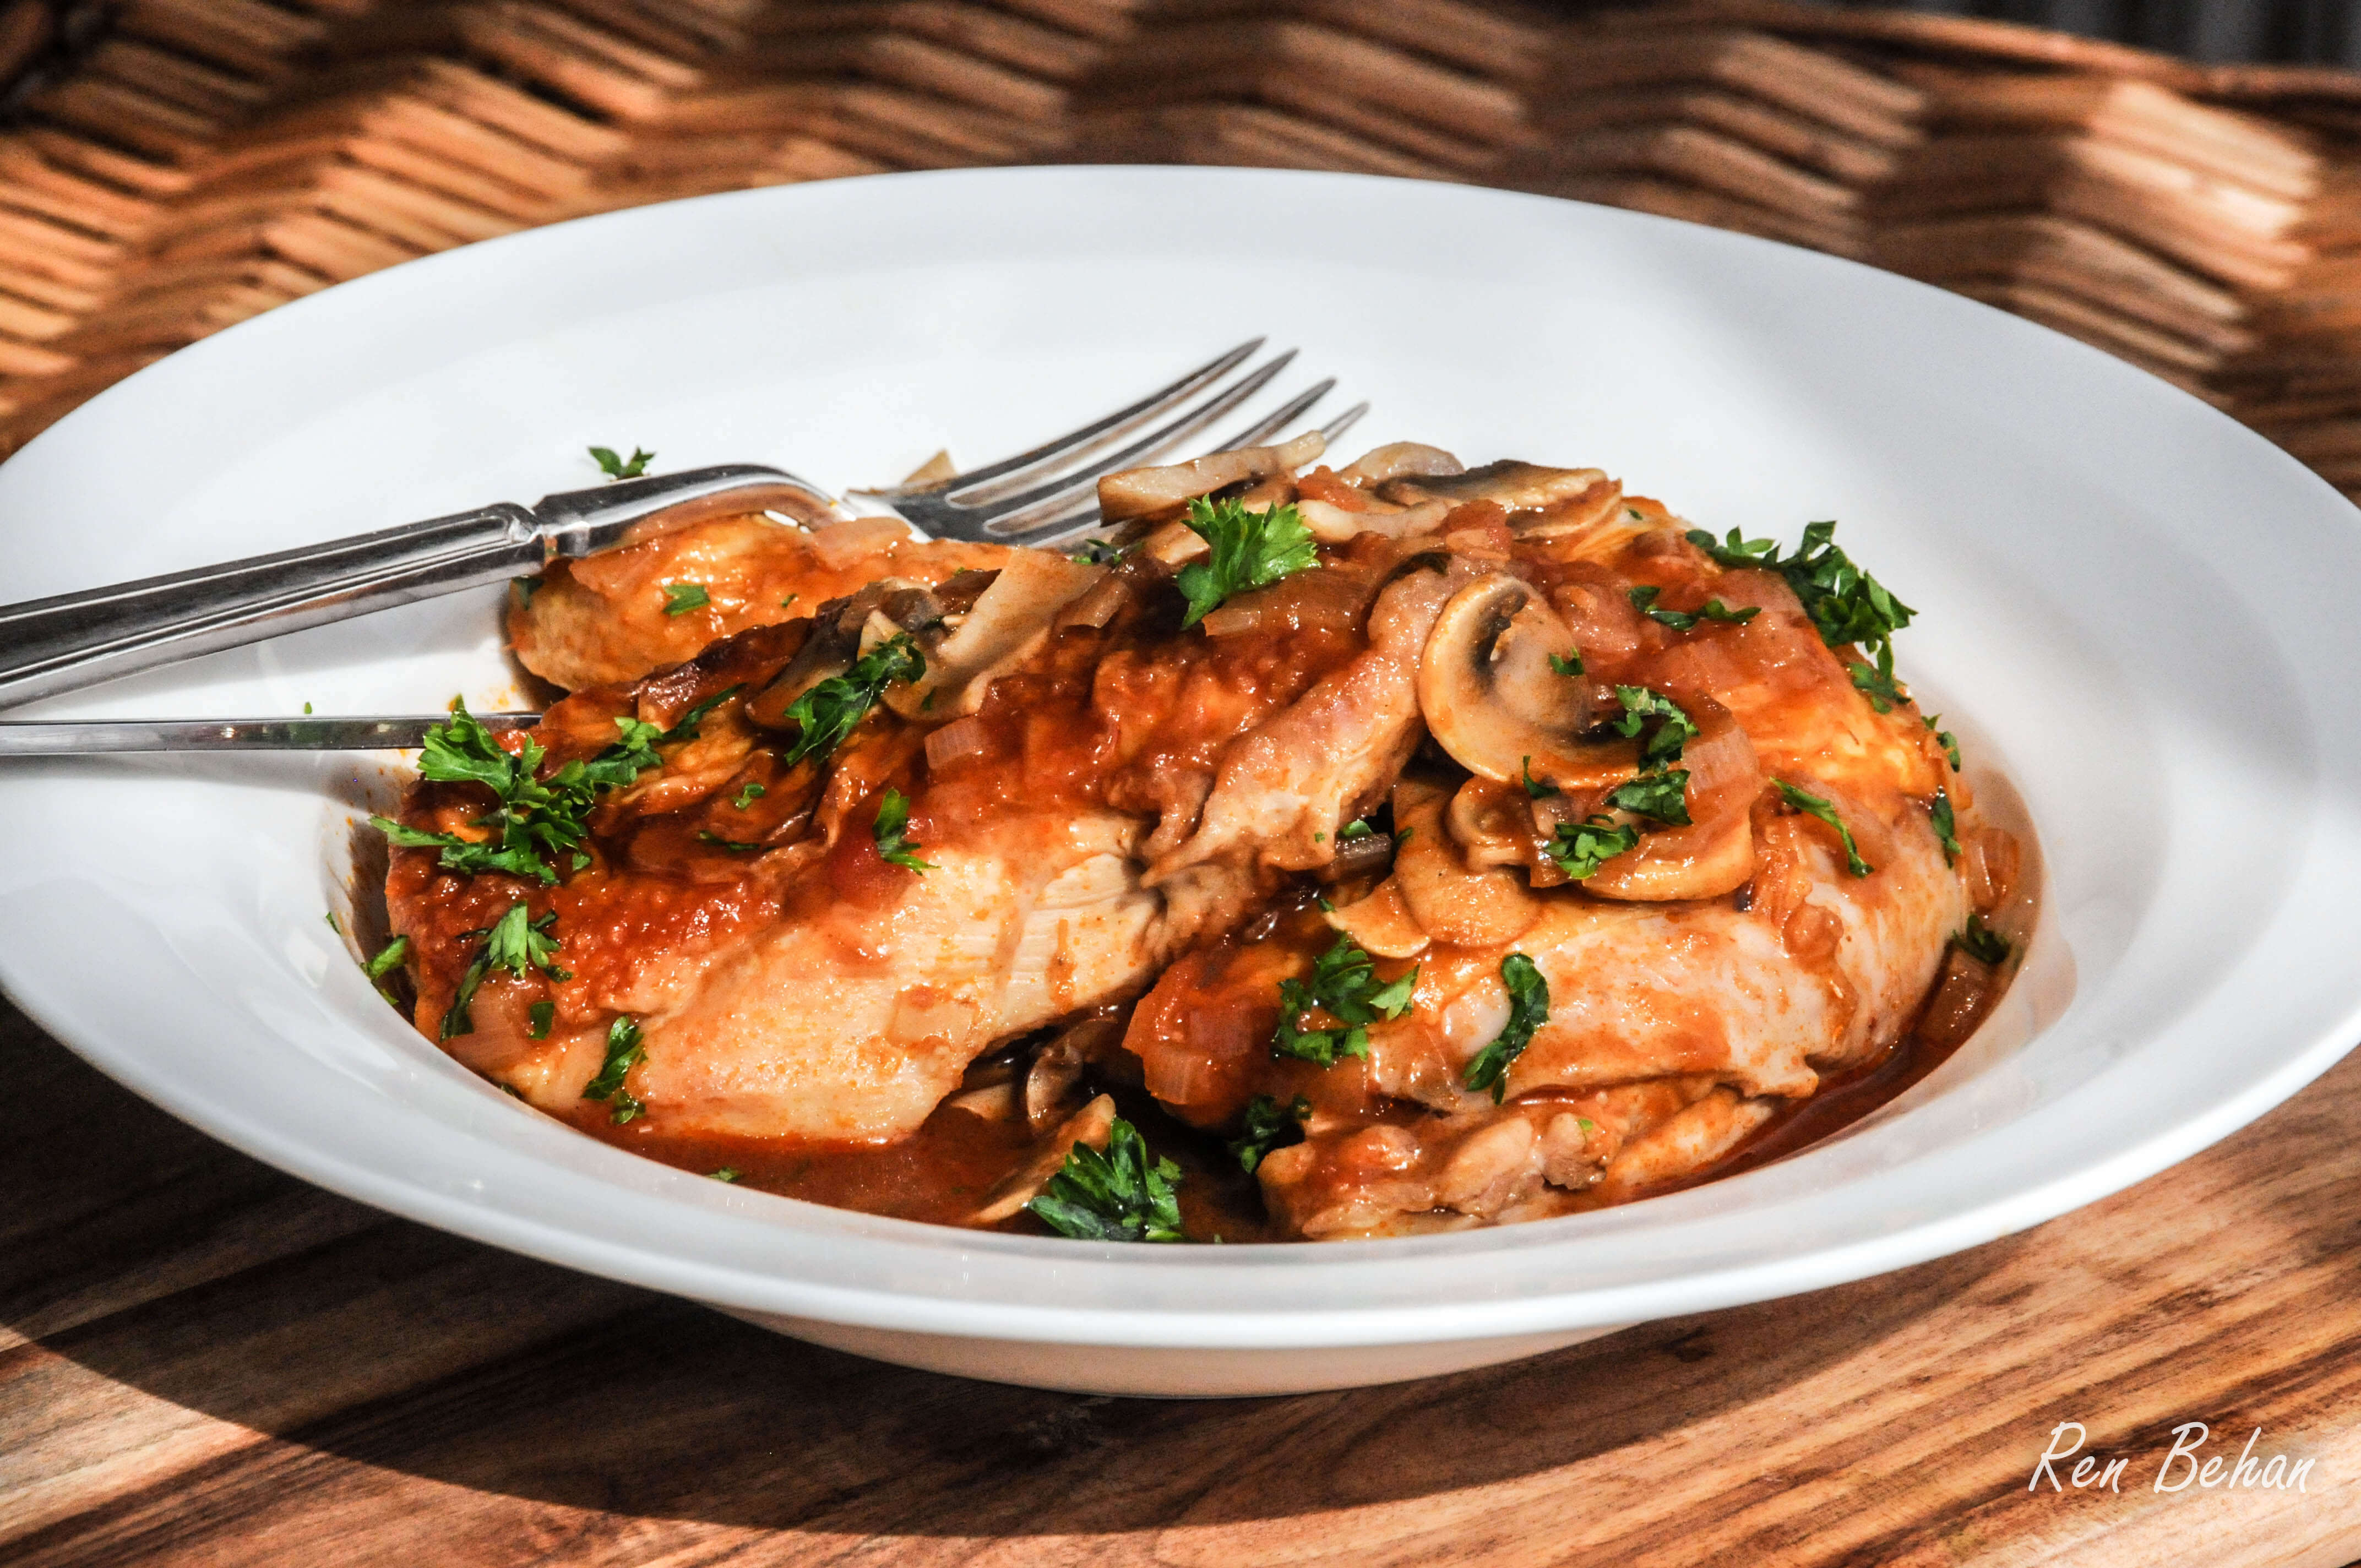 Giveaway: Chicken Chasseur Seasonal Box (Knorr and Forman and Field)